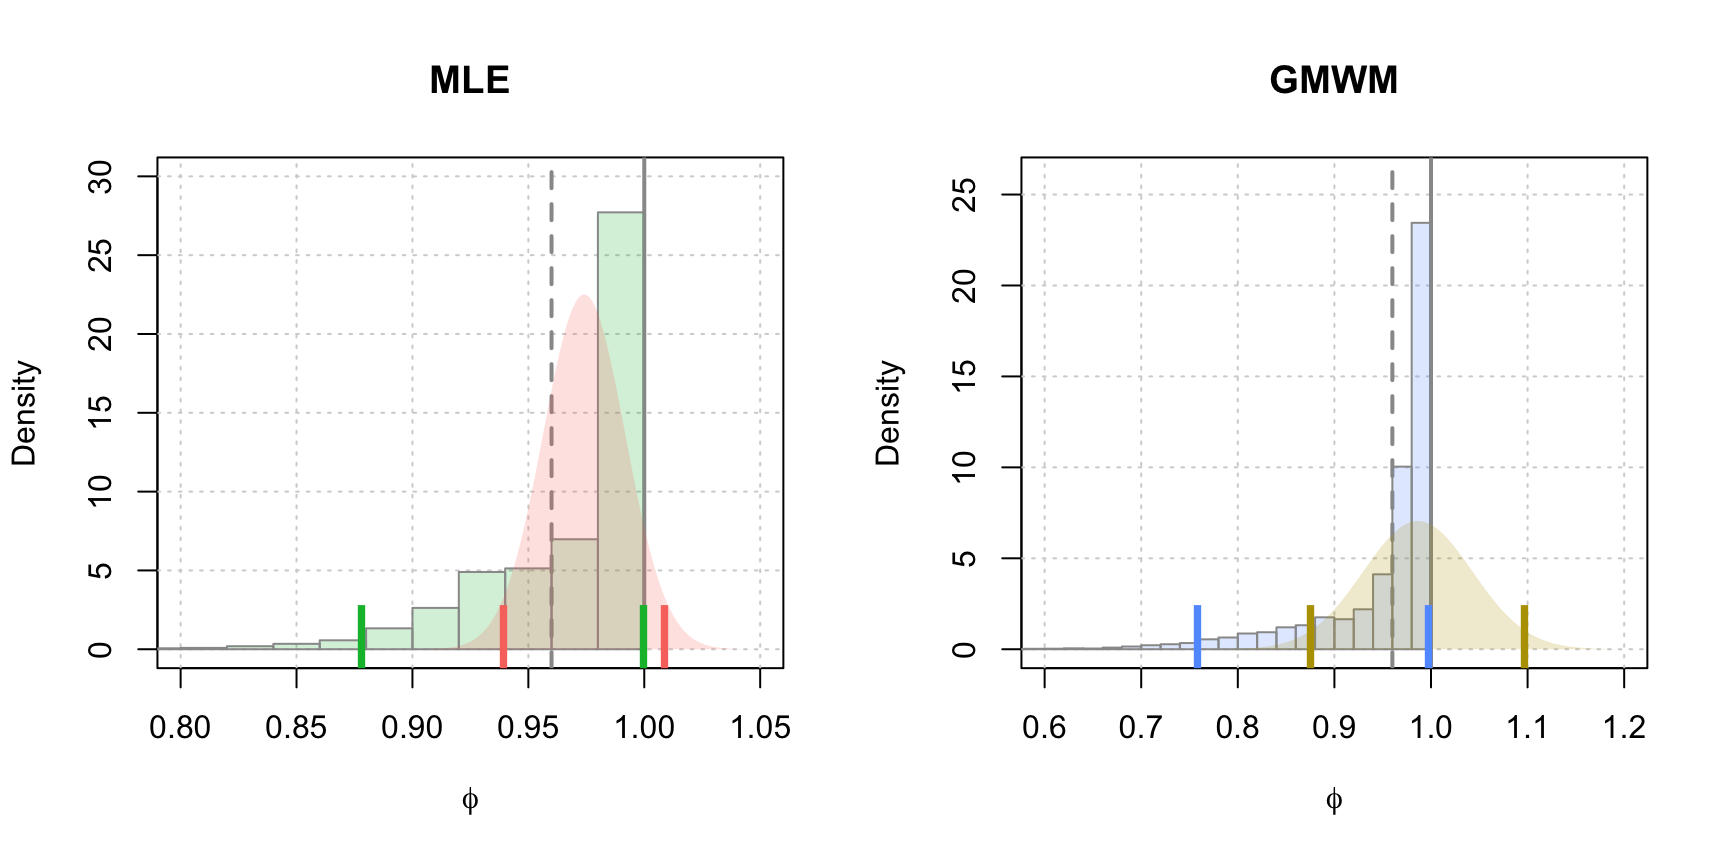 Parametric bootstrap distributions of $\hat{\phi}$ for the MLE and GMWM parameter estimates. The histograms represent the empirical distributions resulting from the parametric bootstrap while the continuous densities represent the estimated asymptotic distributions. The vertical line represents the true value of $\phi$, the dark solid lines represent the upper bound of the parameter space for $\phi$ and the vertical ticks represent the limits of the 95% confidence intervals for the asymptotic distributions (red and gold) and the empirical distributions (green and blue).